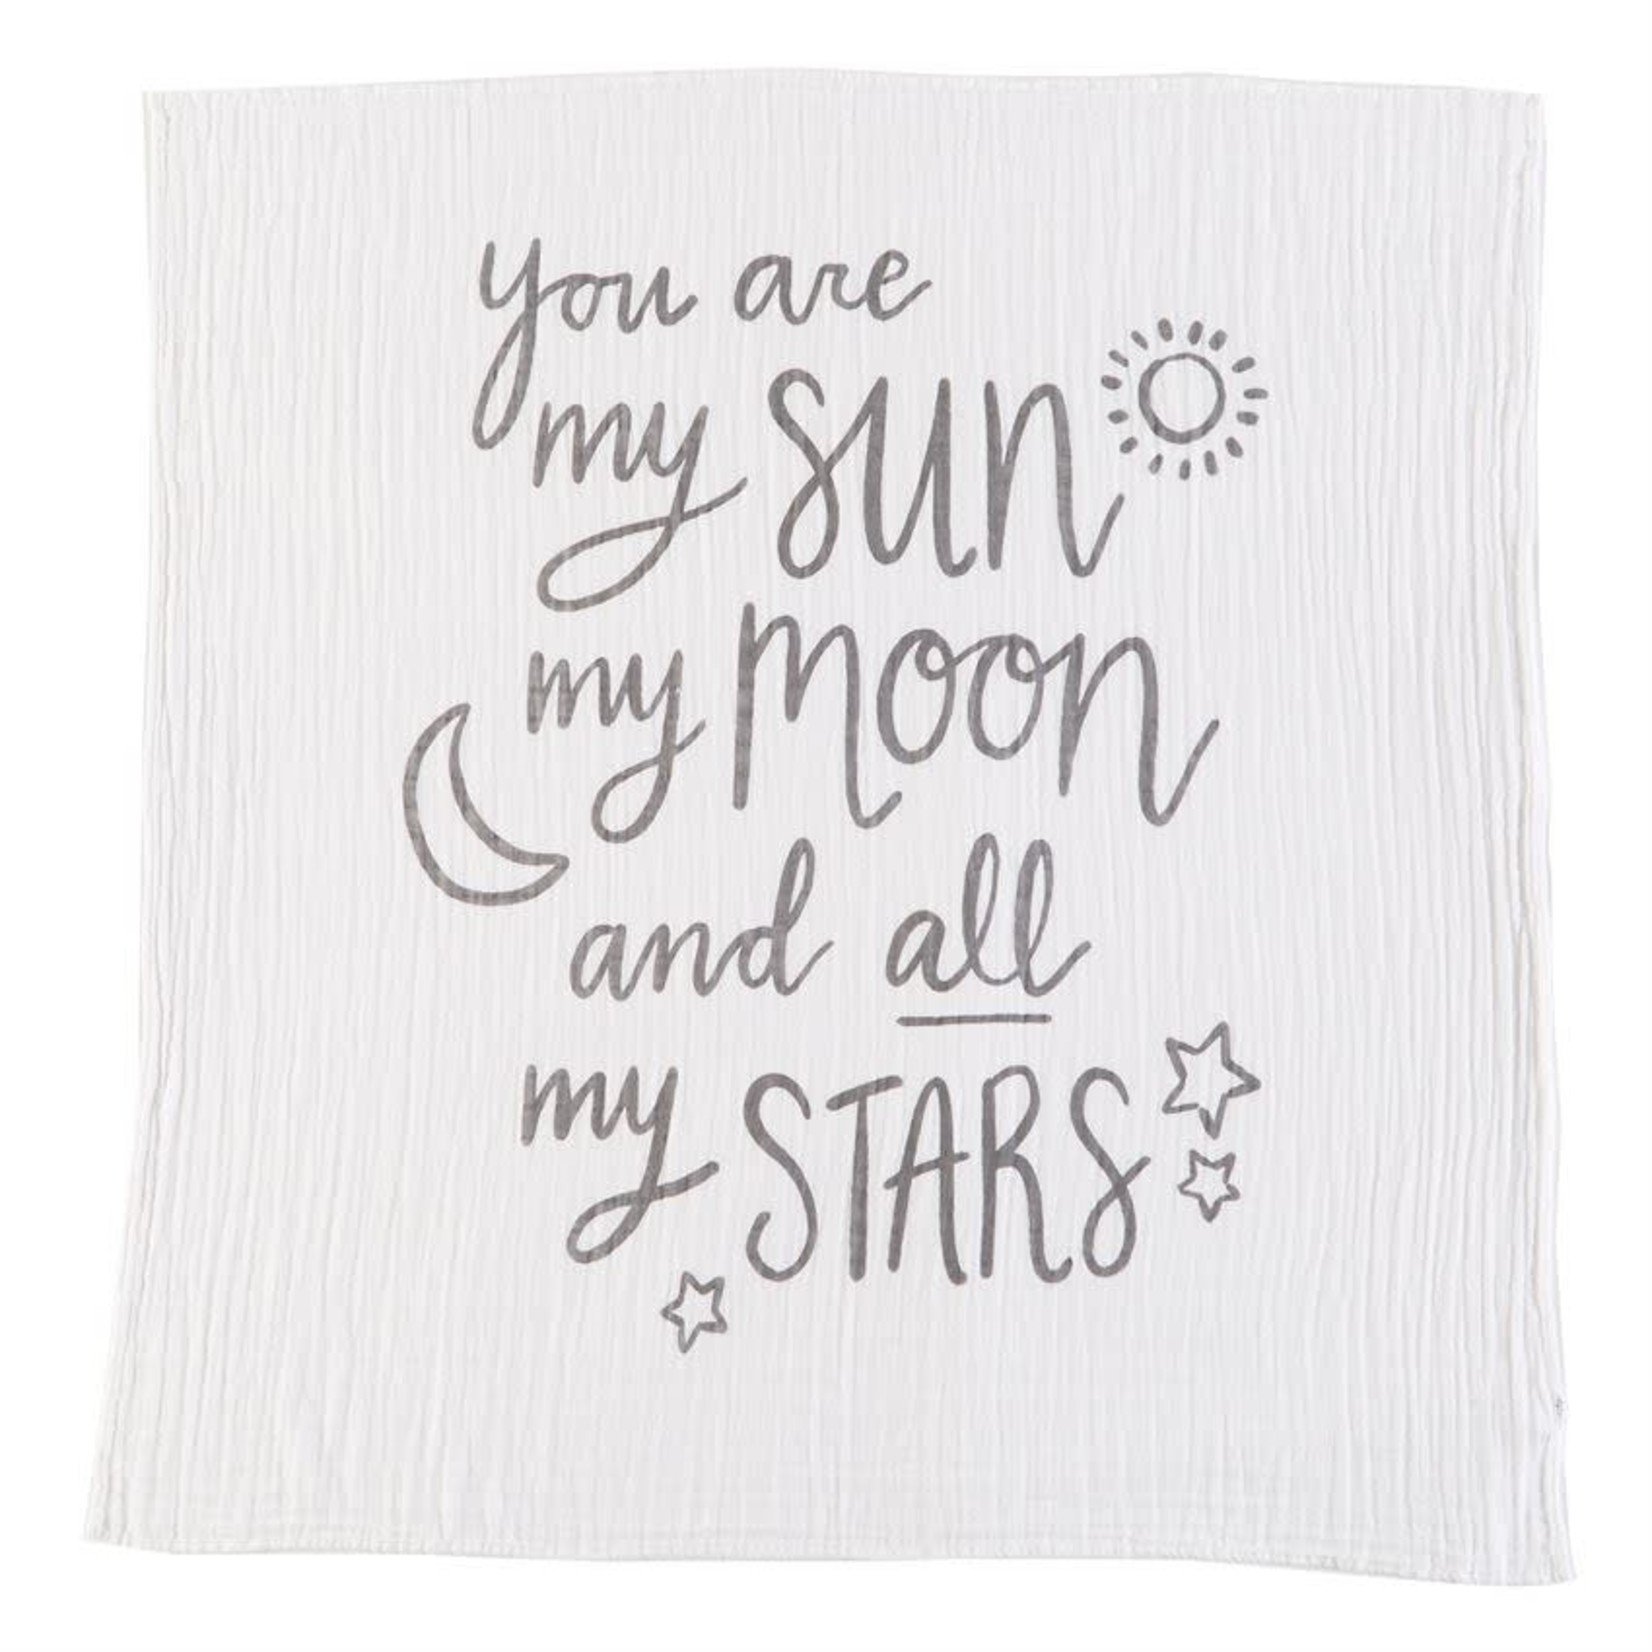 MudPie Muslin Moon and Stars Swaddle